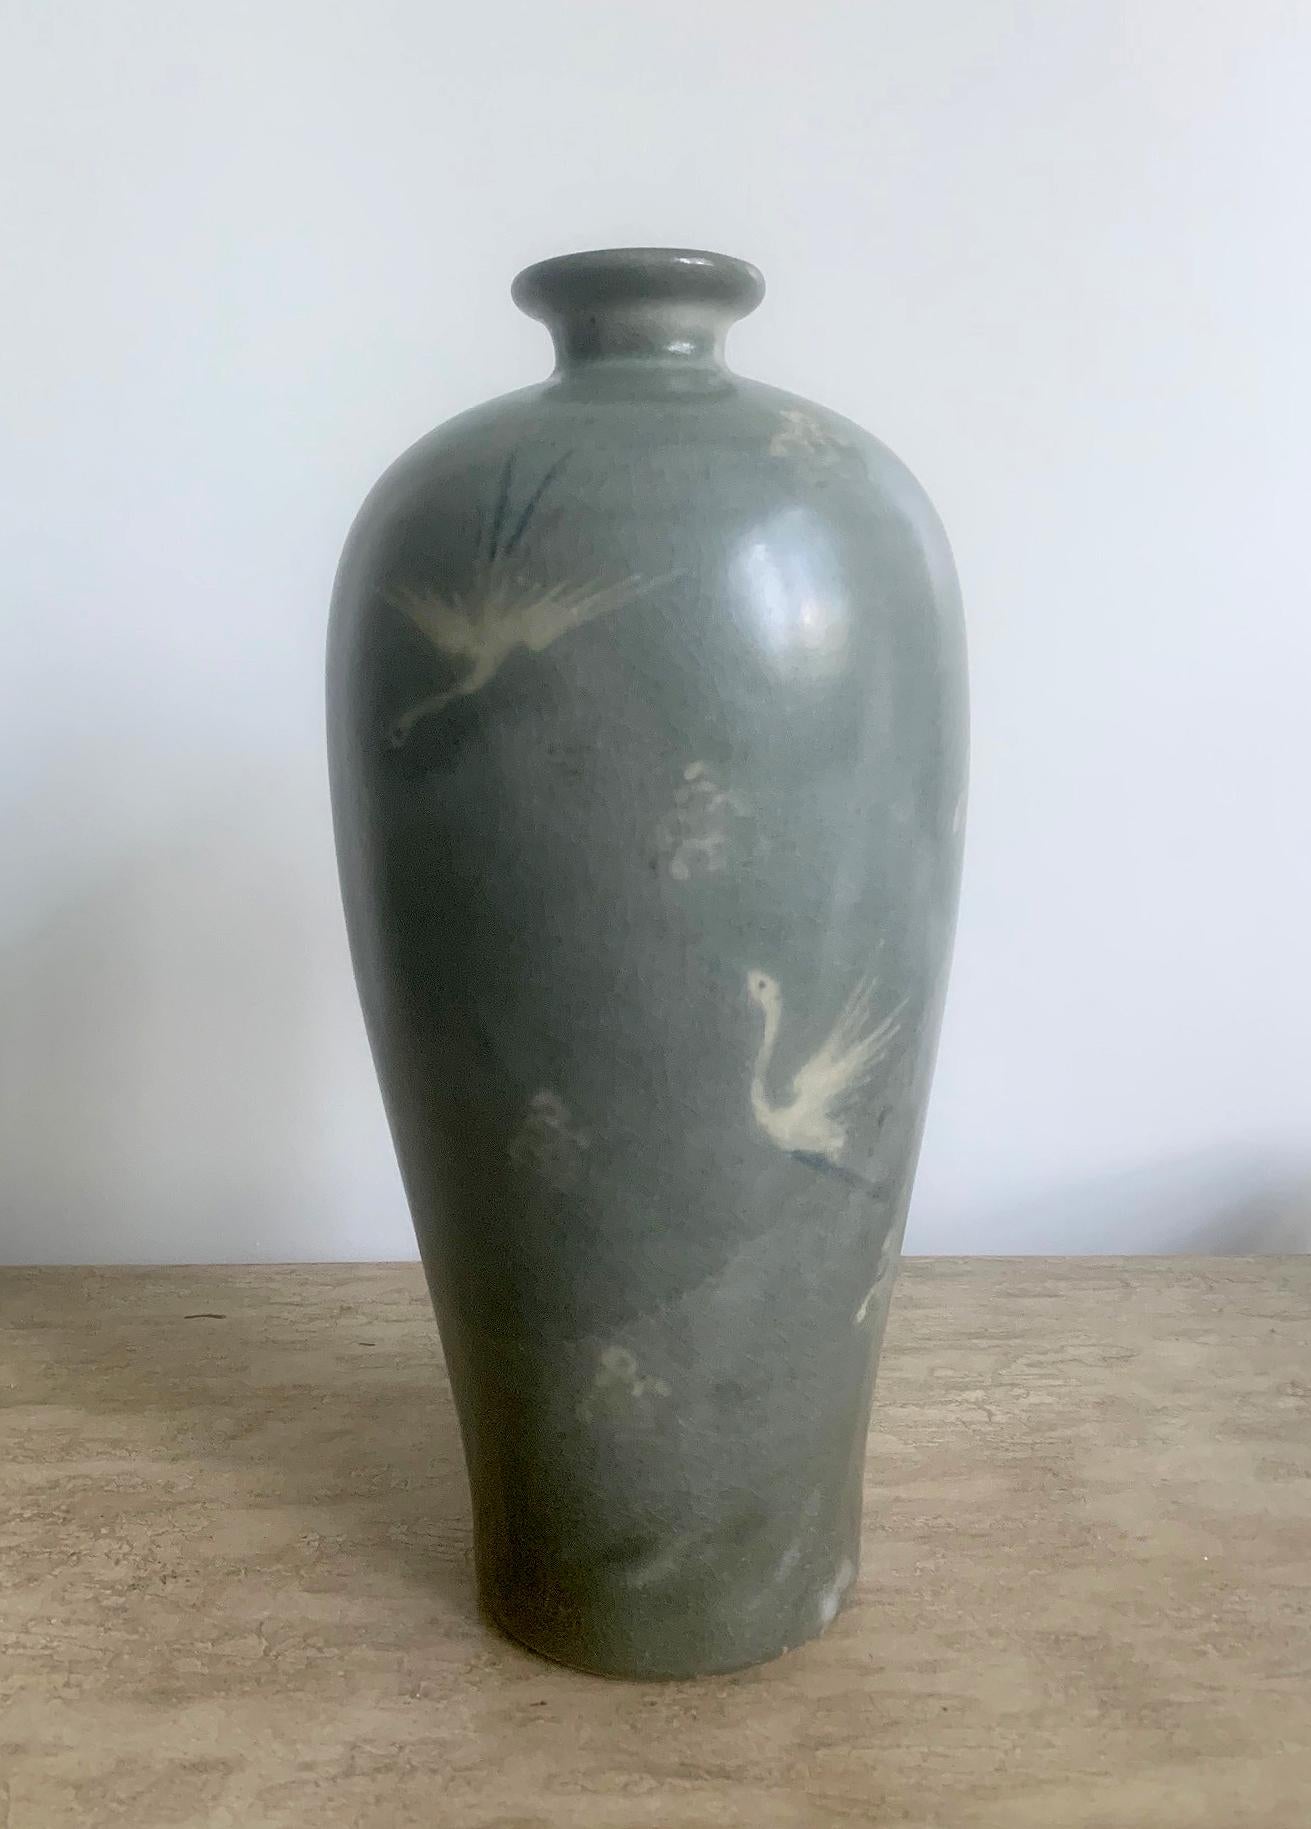 A stoneware vase in class Meiping form, known in Korea as Maebyeong. The vase was traditionally used to hold Plum wine and also the branches of plum blossom in season. The celadon vase feature black and white slip inlays that depicts cranes in